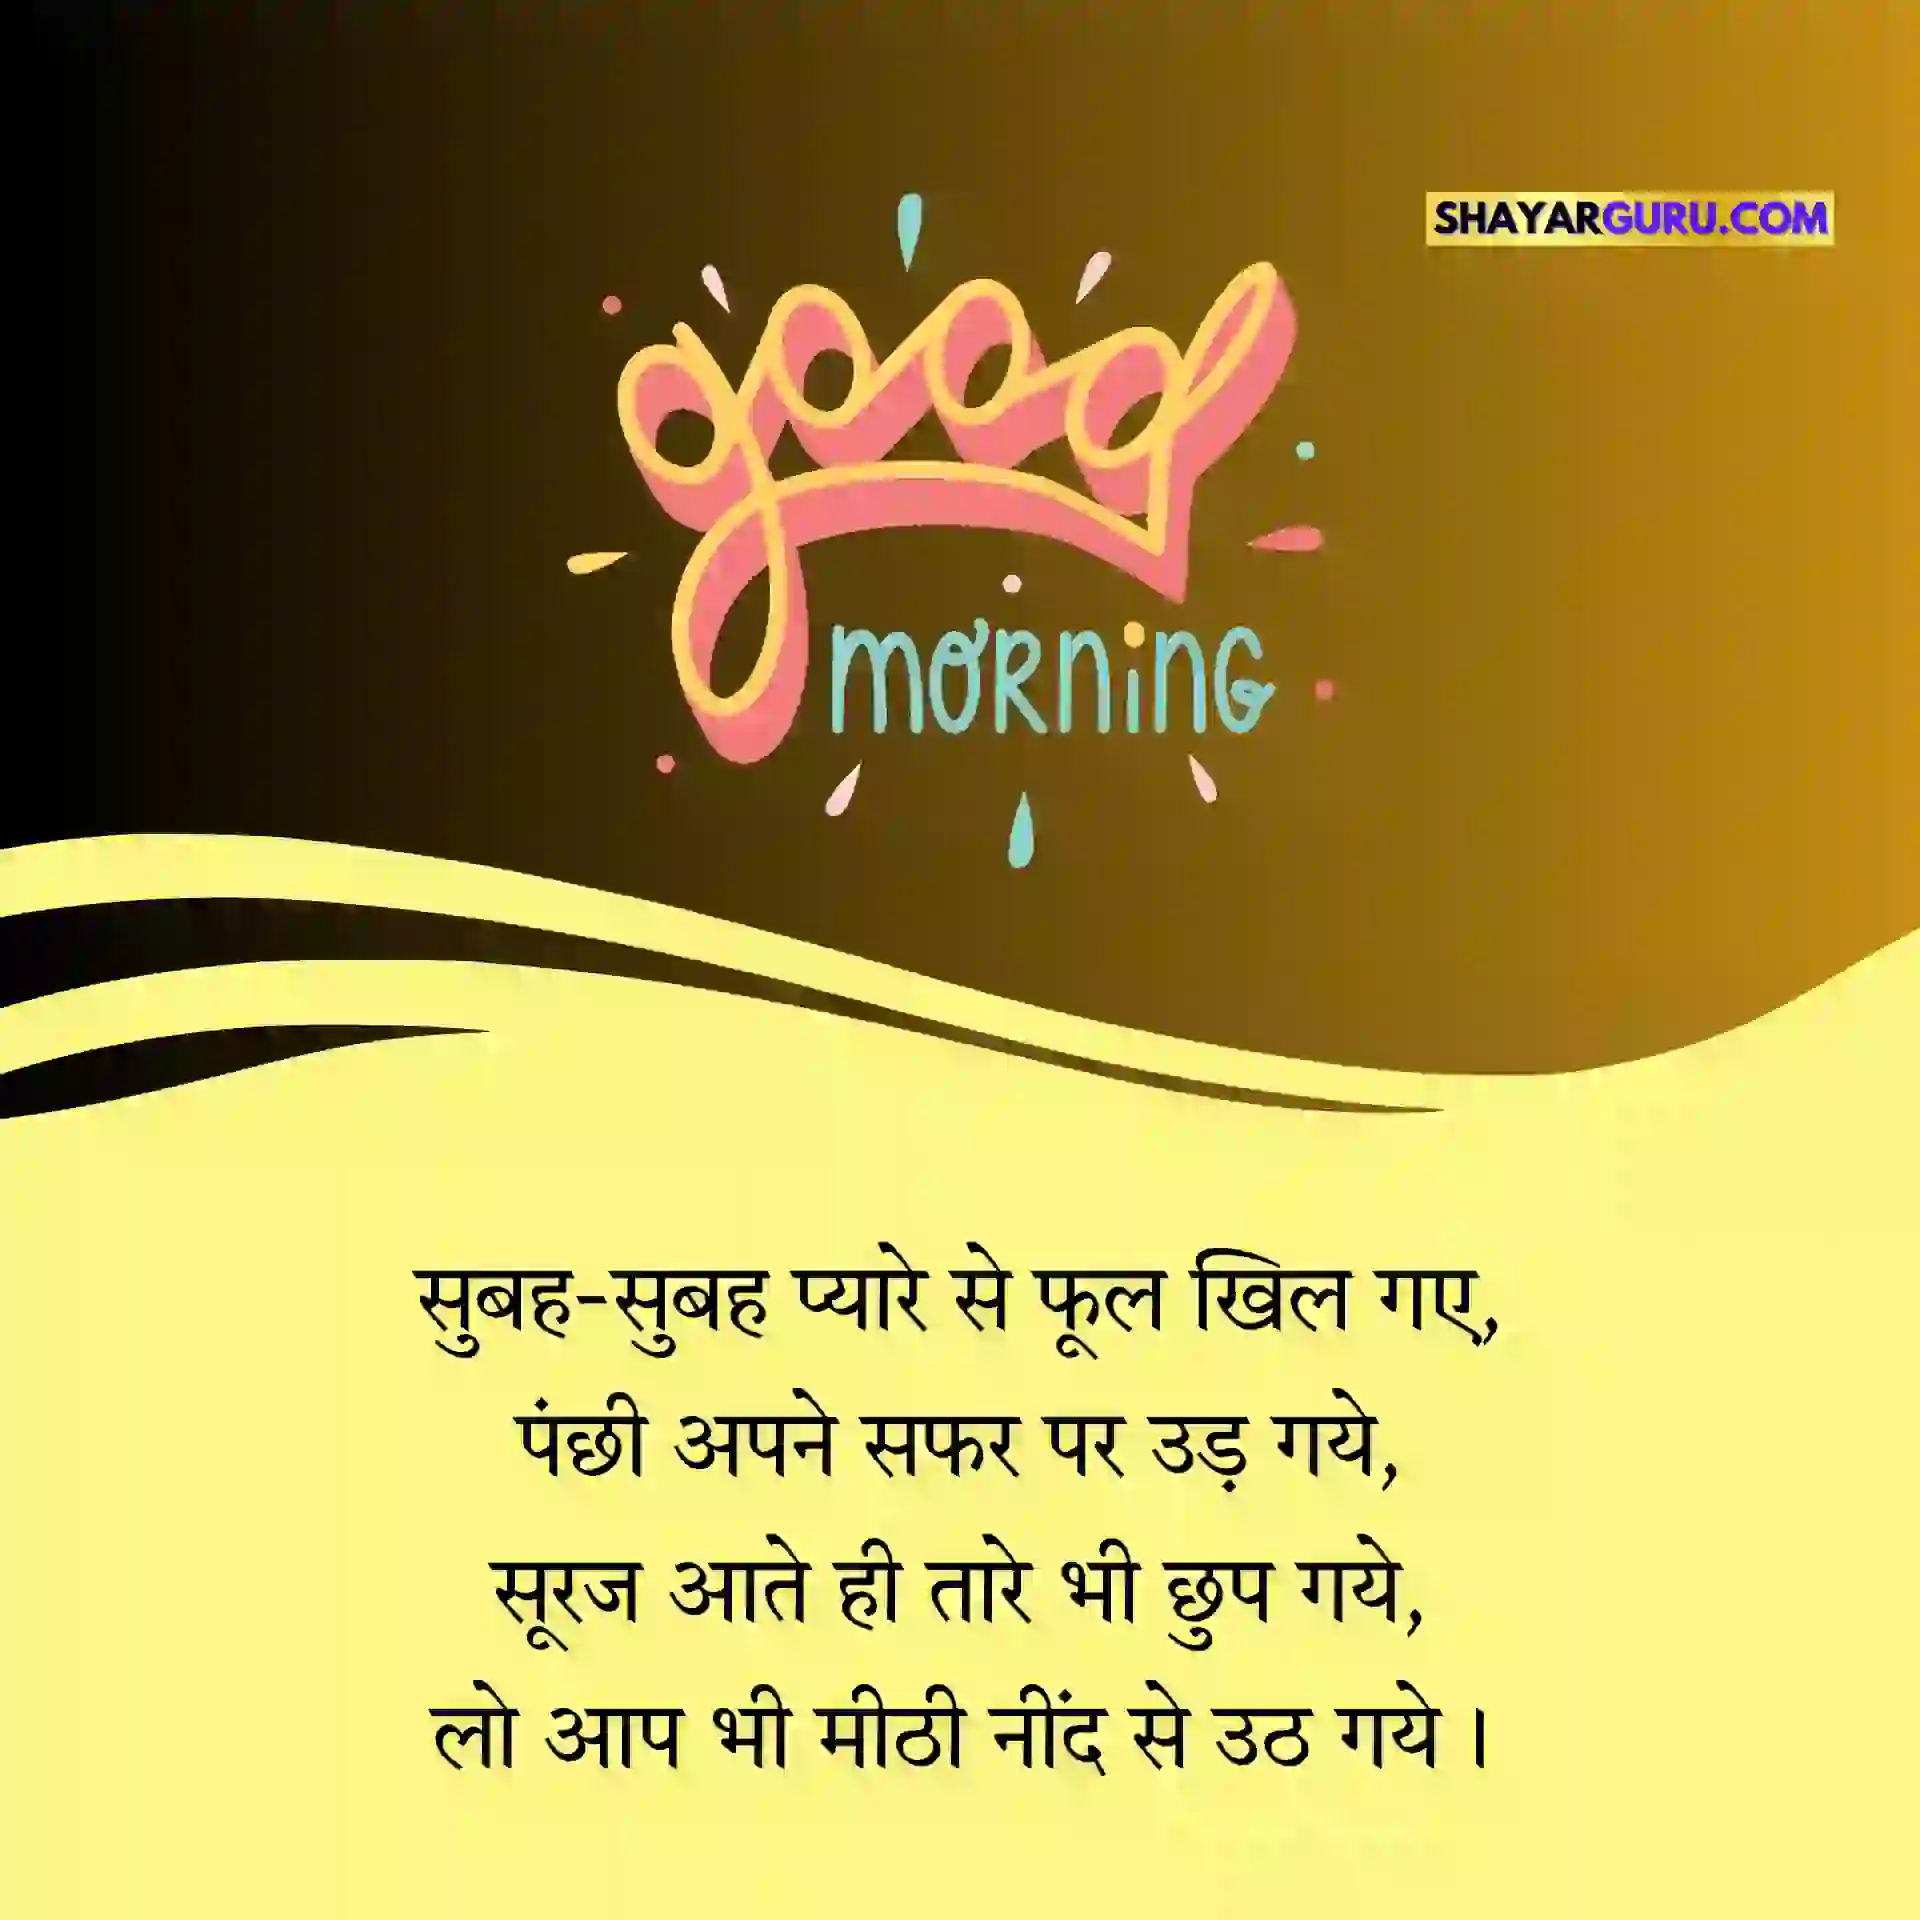 good morning messages images